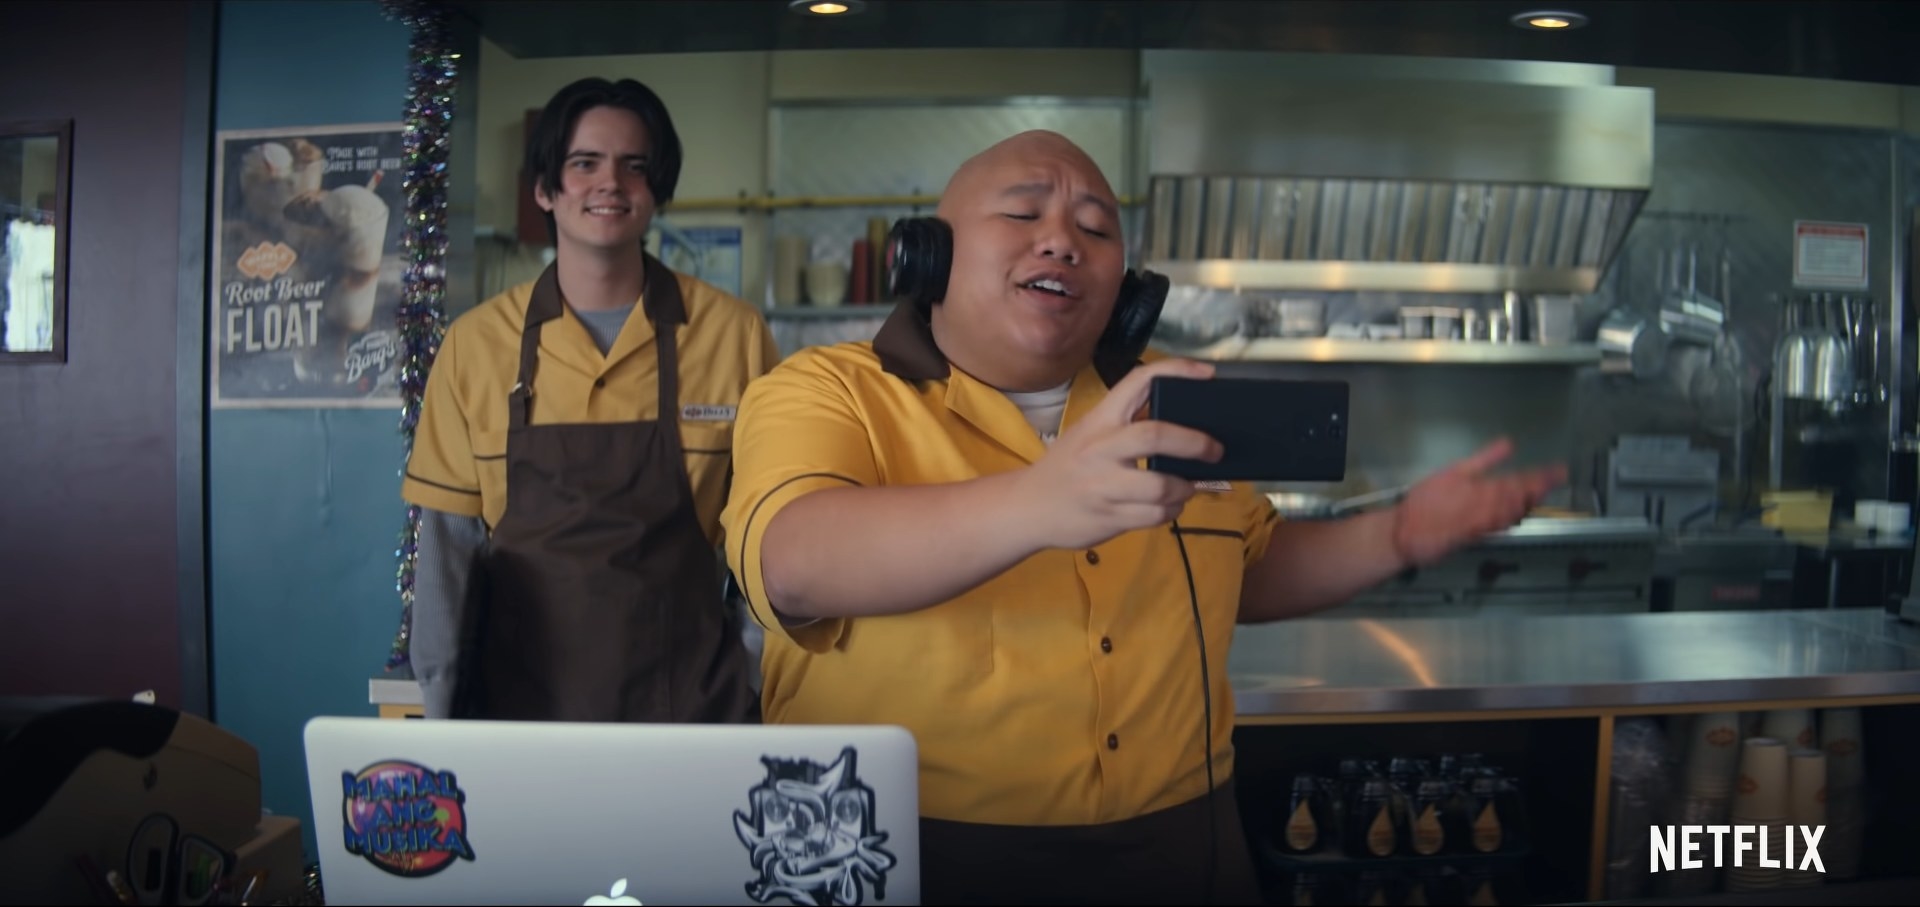 A restaurant worker wearing a pair of headphones, watches a music video on his smartphone while his co-worker looks at him from behind